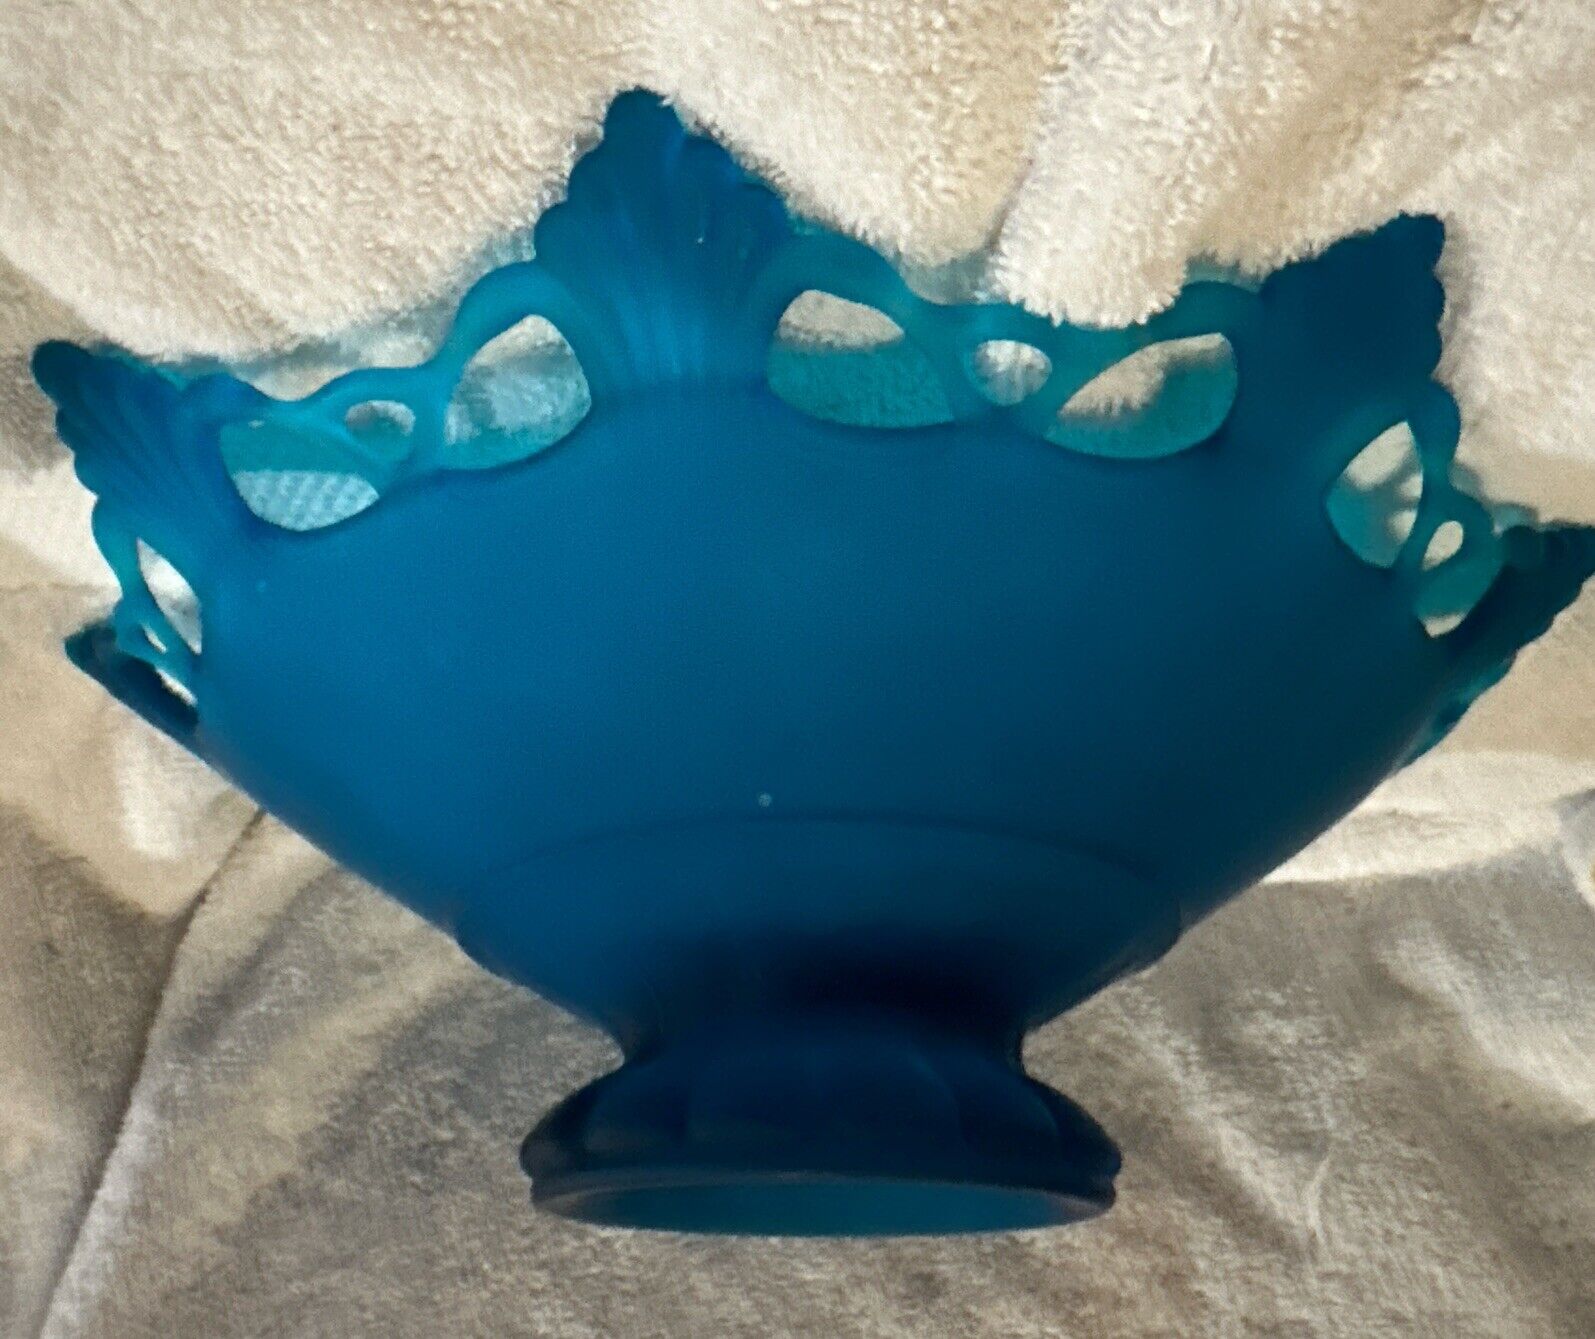 Vintage Westmoreland Ring And Petal Turquoise Mist Reticulated Bowl 12 X 4.5”